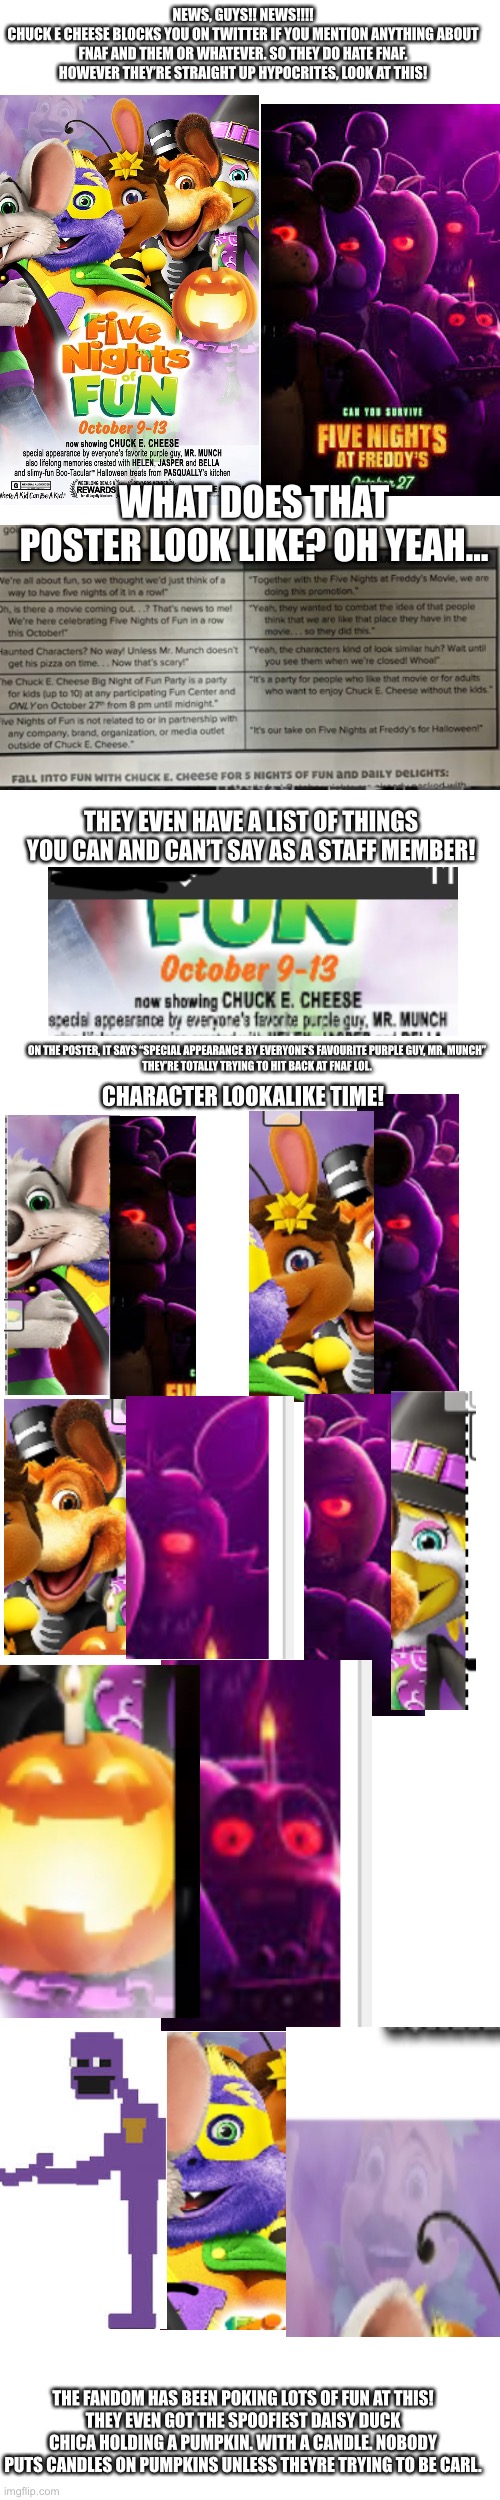 This is so goofy! I like that the fandom isn’t even that mad, just accepting it and making fun of chuck e cheese’s stupid decisi | NEWS, GUYS!! NEWS!!!!
CHUCK E CHEESE BLOCKS YOU ON TWITTER IF YOU MENTION ANYTHING ABOUT FNAF AND THEM OR WHATEVER. SO THEY DO HATE FNAF. HOWEVER THEY’RE STRAIGHT UP HYPOCRITES, LOOK AT THIS! WHAT DOES THAT POSTER LOOK LIKE? OH YEAH…; THEY EVEN HAVE A LIST OF THINGS YOU CAN AND CAN’T SAY AS A STAFF MEMBER! ON THE POSTER, IT SAYS “SPECIAL APPEARANCE BY EVERYONE’S FAVOURITE PURPLE GUY, MR. MUNCH”
THEY’RE TOTALLY TRYING TO HIT BACK AT FNAF LOL. CHARACTER LOOKALIKE TIME! THE FANDOM HAS BEEN POKING LOTS OF FUN AT THIS!
THEY EVEN GOT THE SPOOFIEST DAISY DUCK CHICA HOLDING A PUMPKIN. WITH A CANDLE. NOBODY PUTS CANDLES ON PUMPKINS UNLESS THEYRE TRYING TO BE CARL. | image tagged in fnaf,five nights at freddys,freddy fazbear,chuck e cheese | made w/ Imgflip meme maker